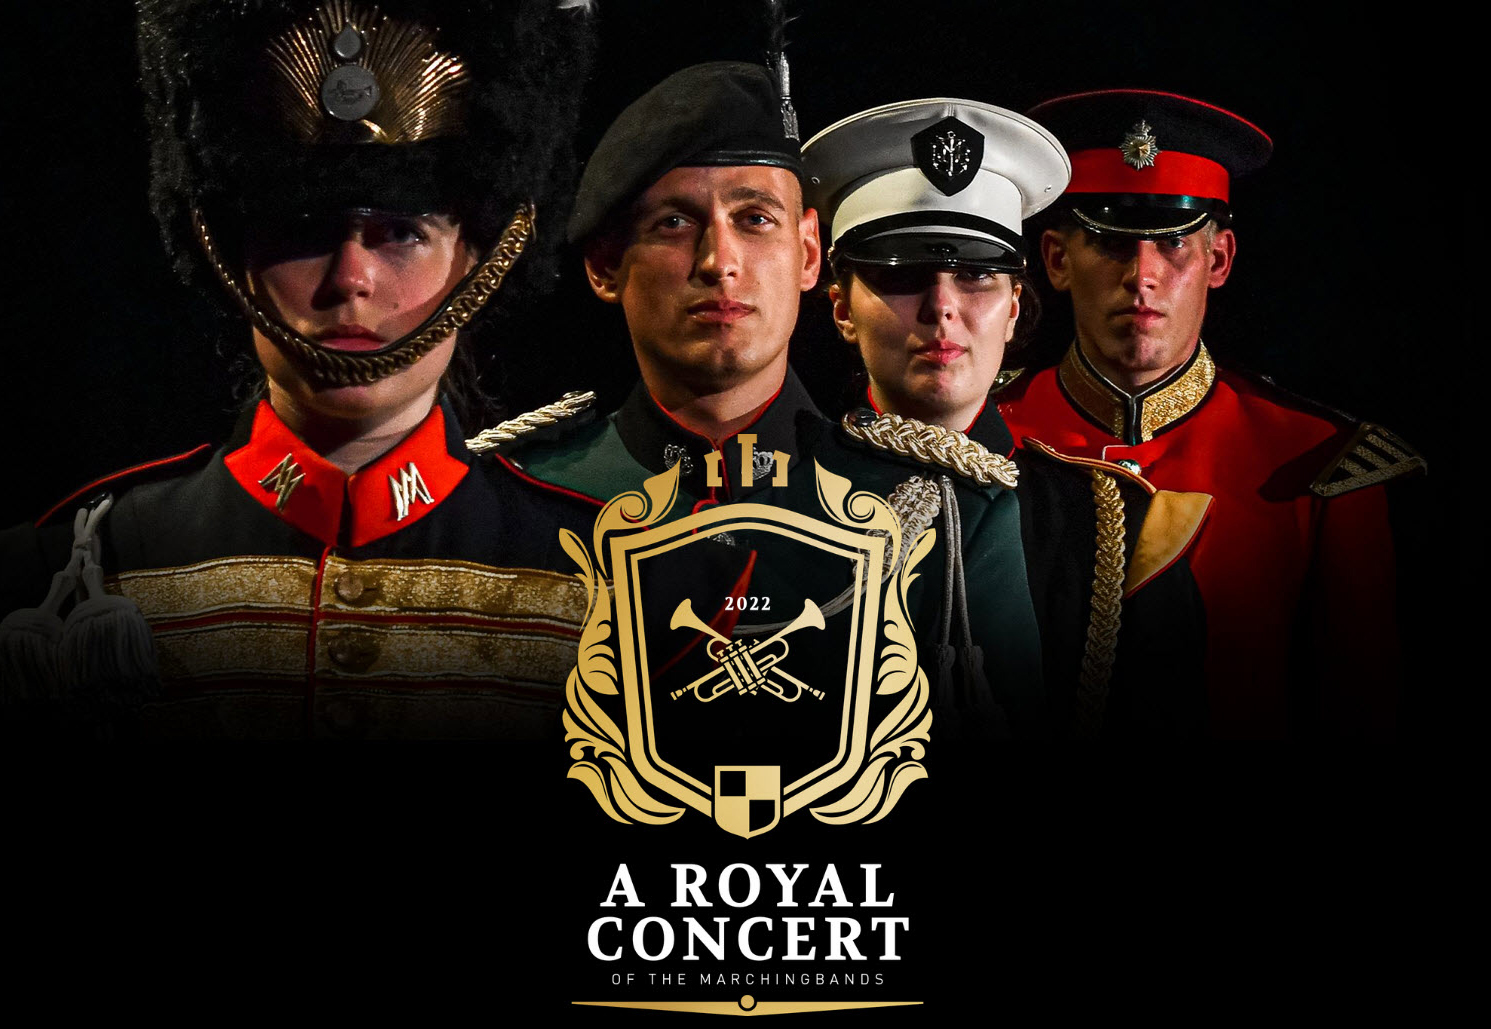 A Royal Concert of the Marchingbands